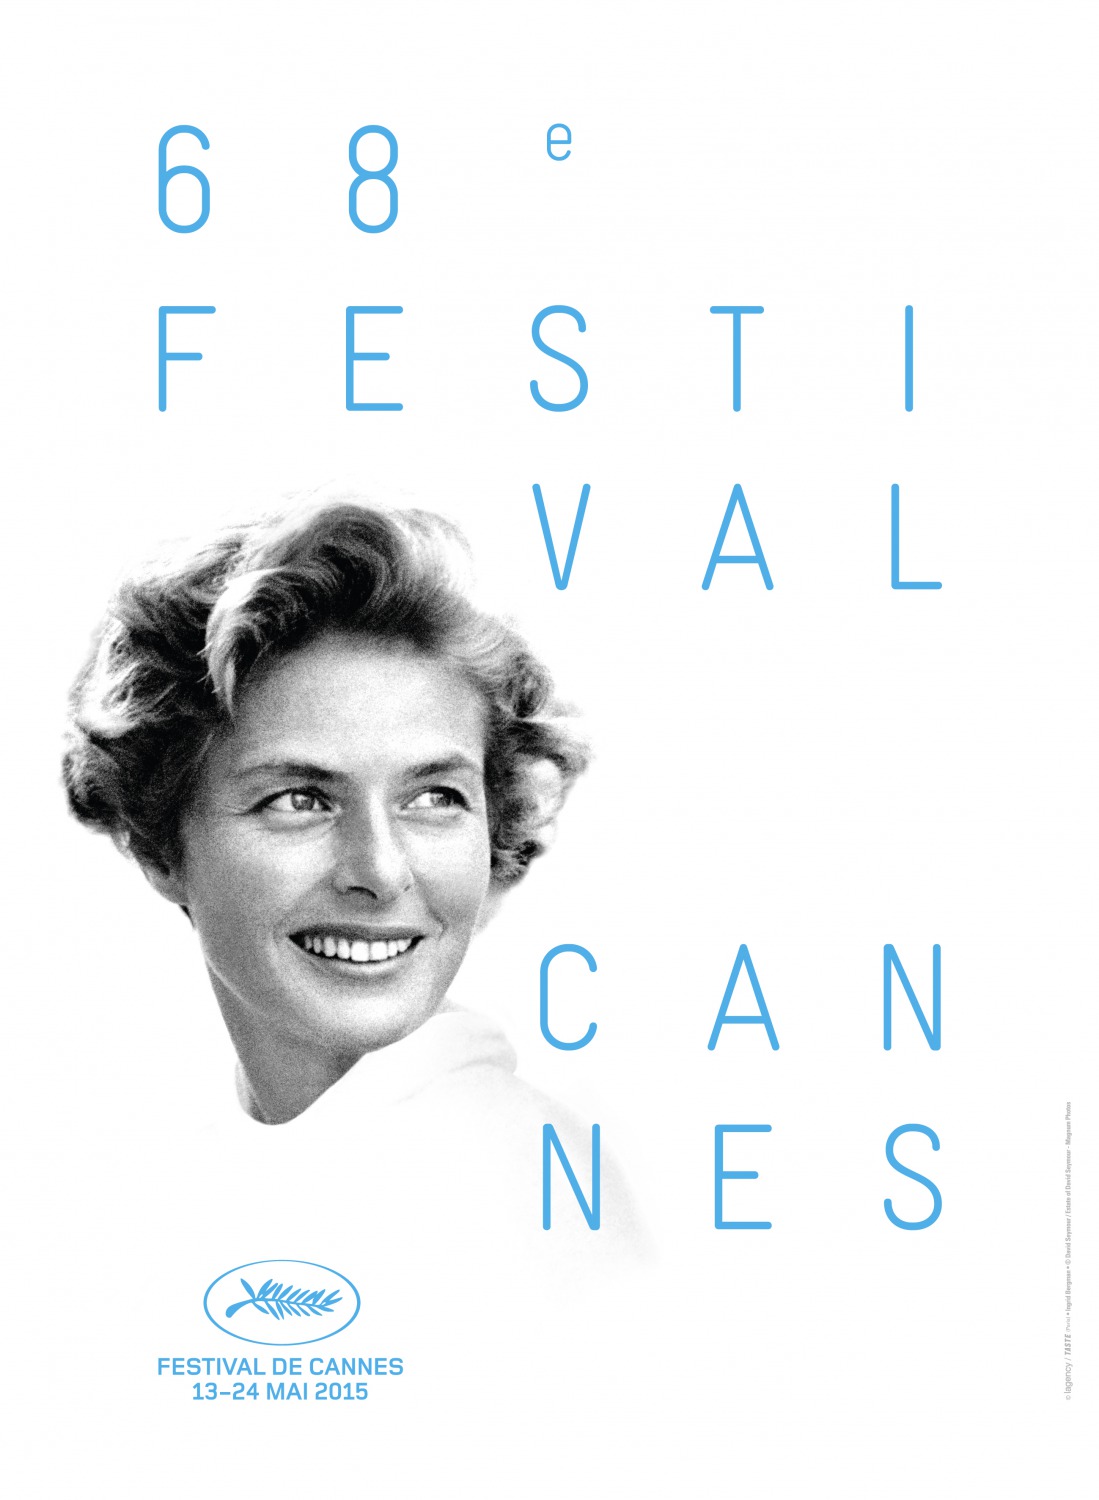 Extra Large TV Poster Image for Cannes International Film Festival (#5 of 8)